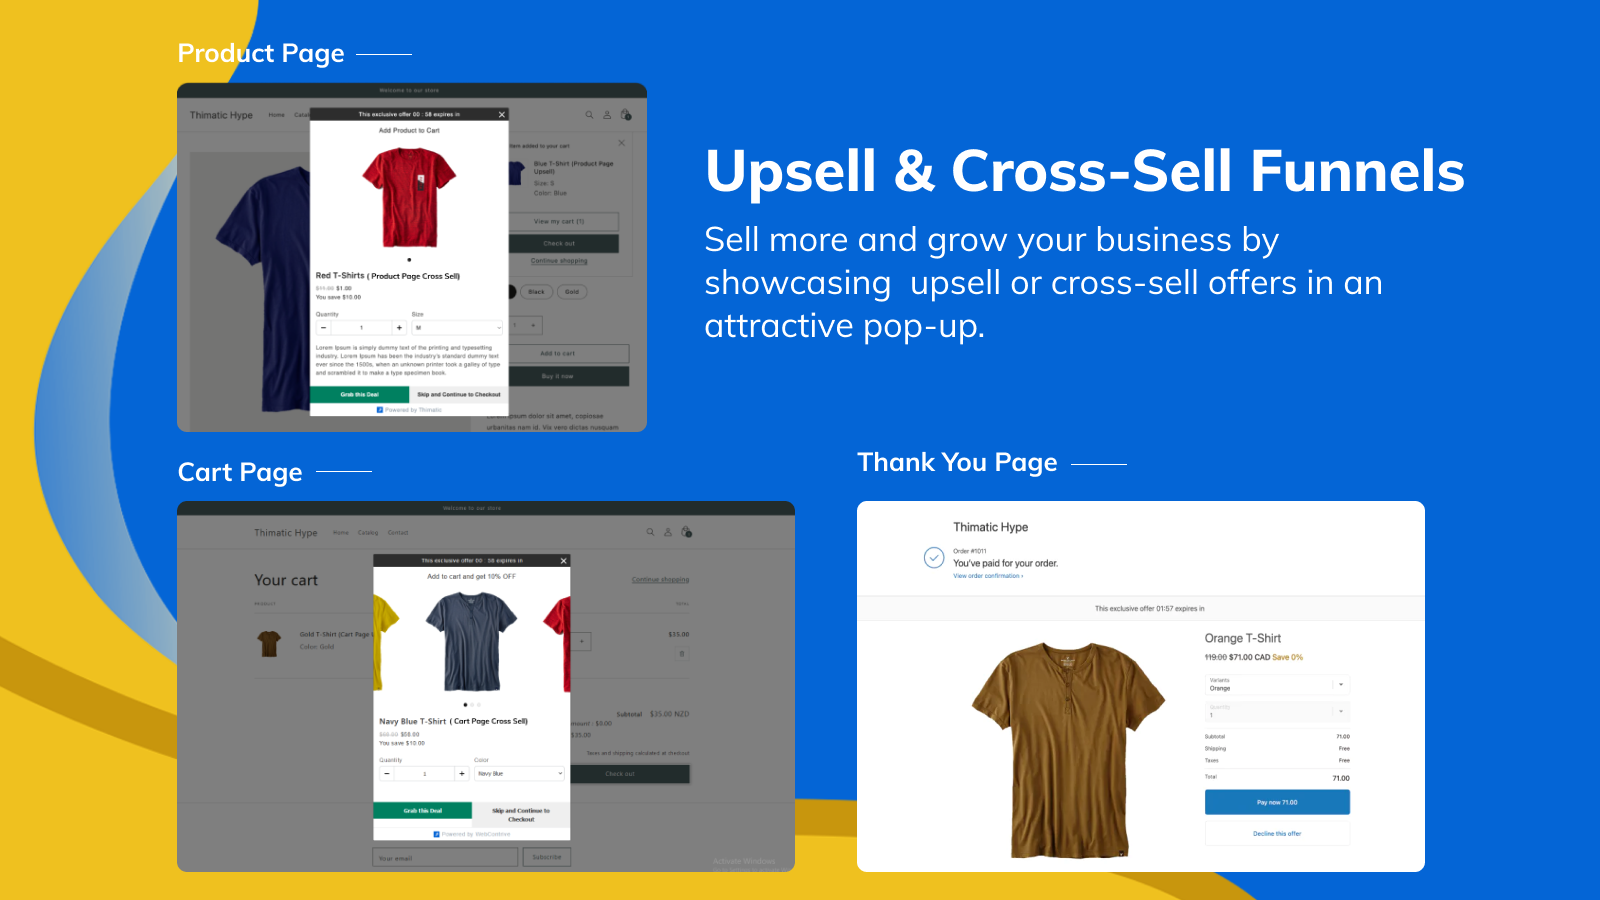 Showcase upsell and cross-sell offers in an attractive popup.